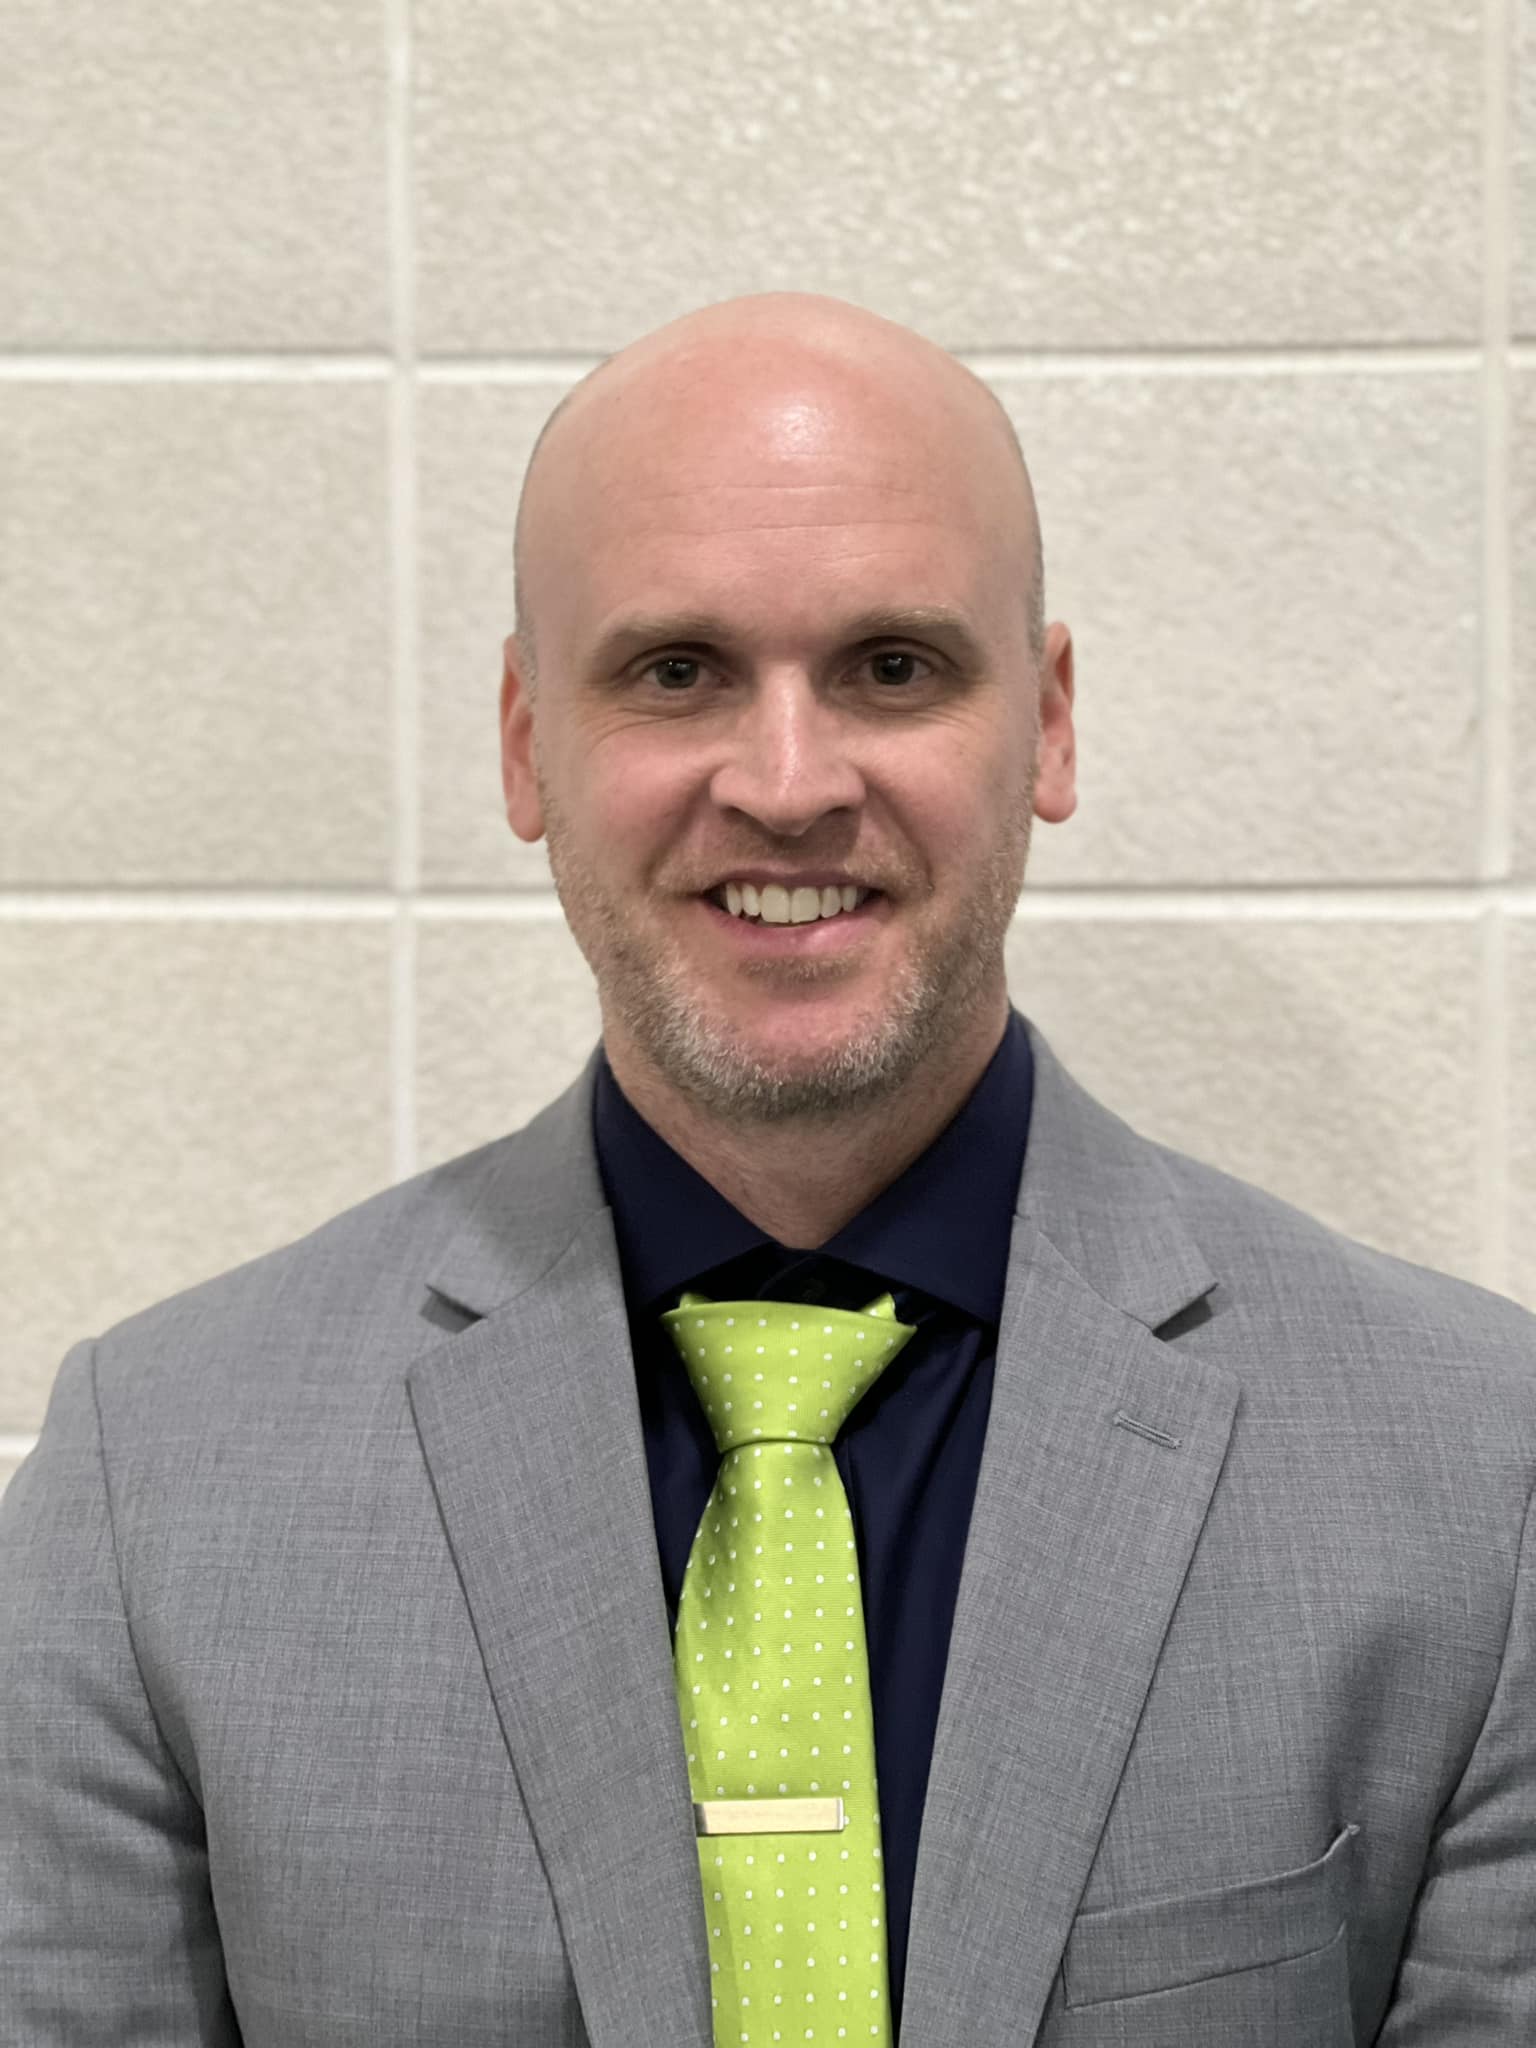 Photograph of Shawn Murphy, Delta Middle School Principal